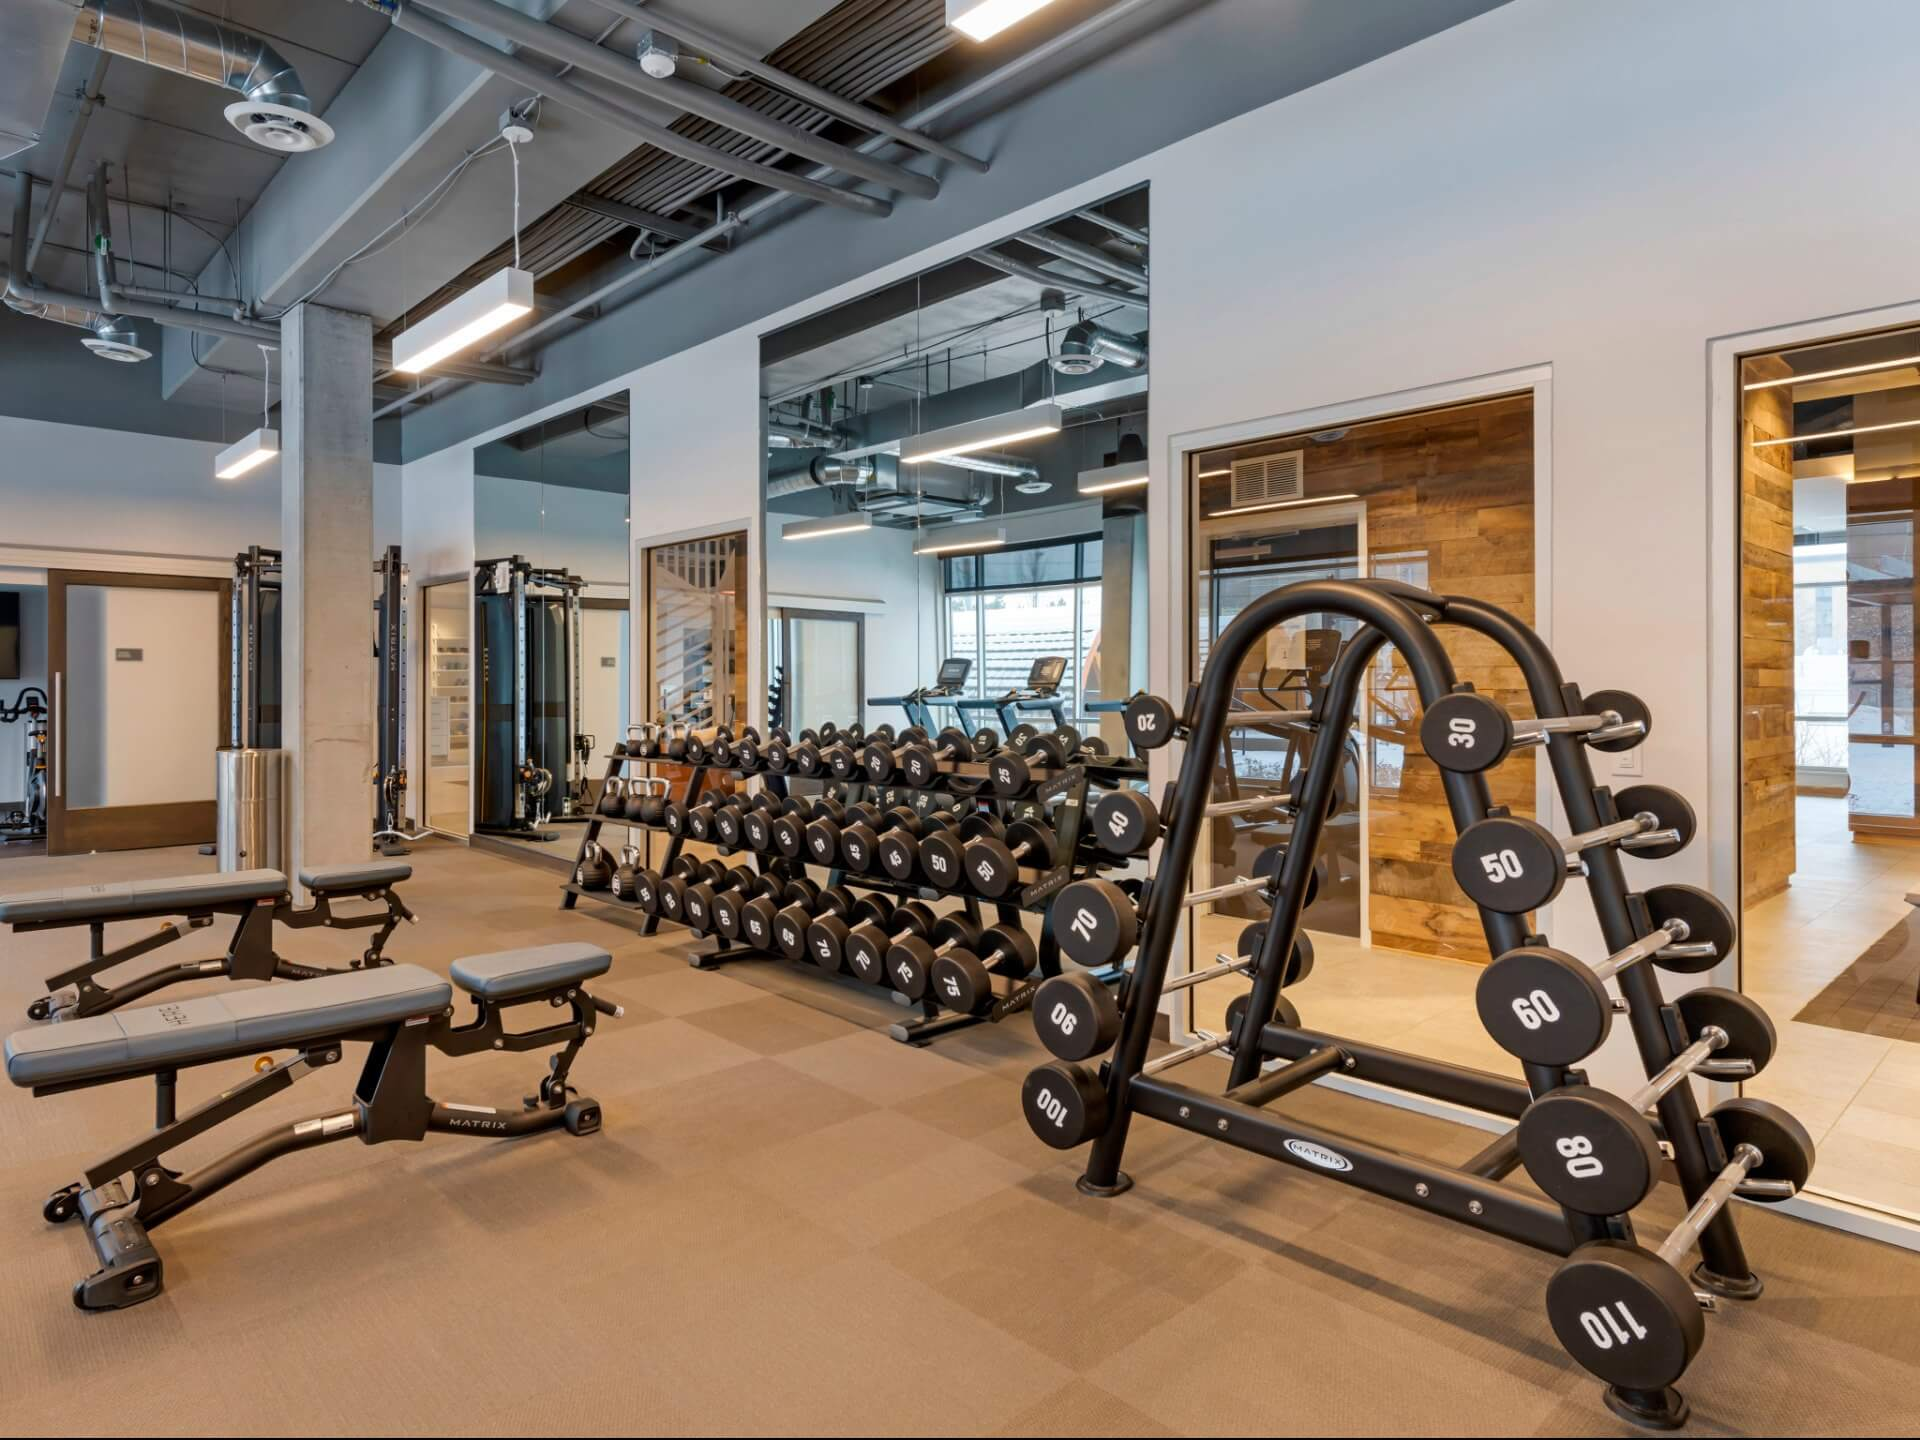 Fitness center at HERE Minneapolis.